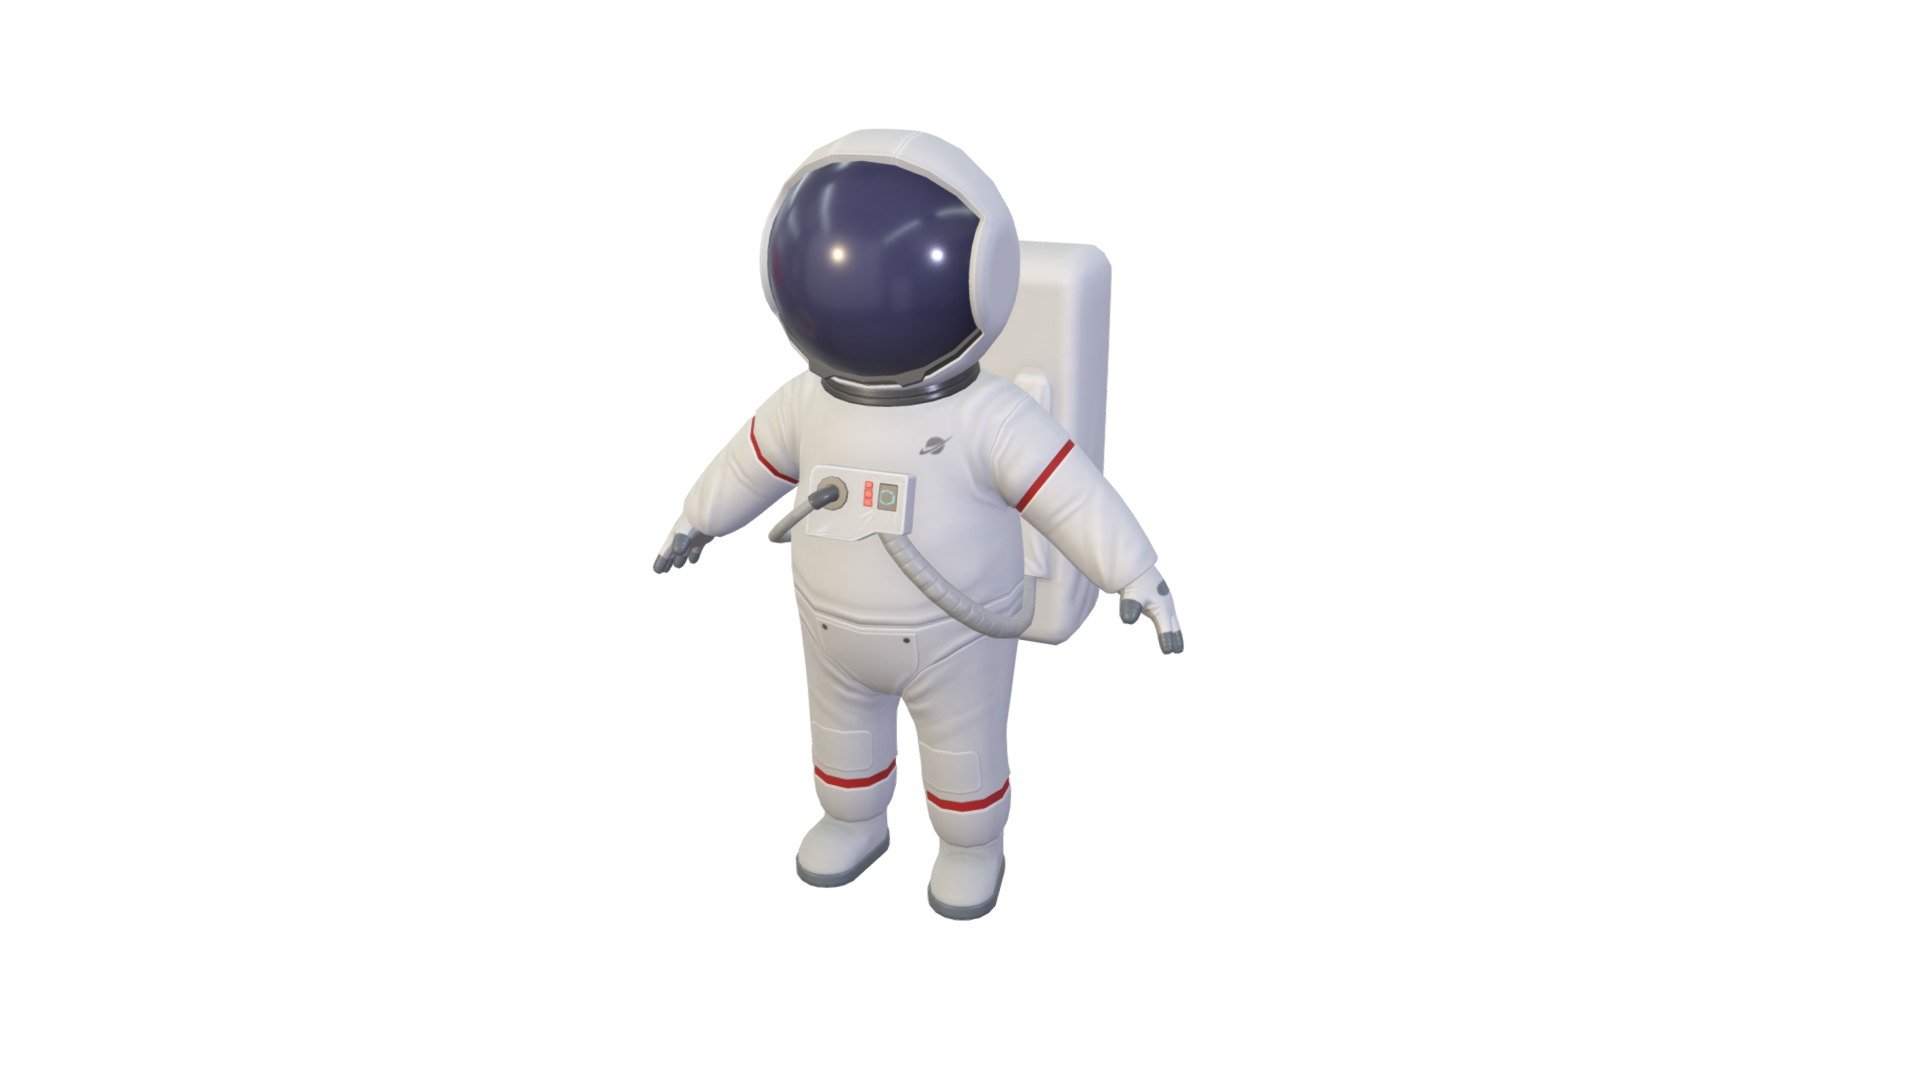 astronaut-buy-royalty-free-3d-model-by-bariacg-07e5384-sketchfab-store